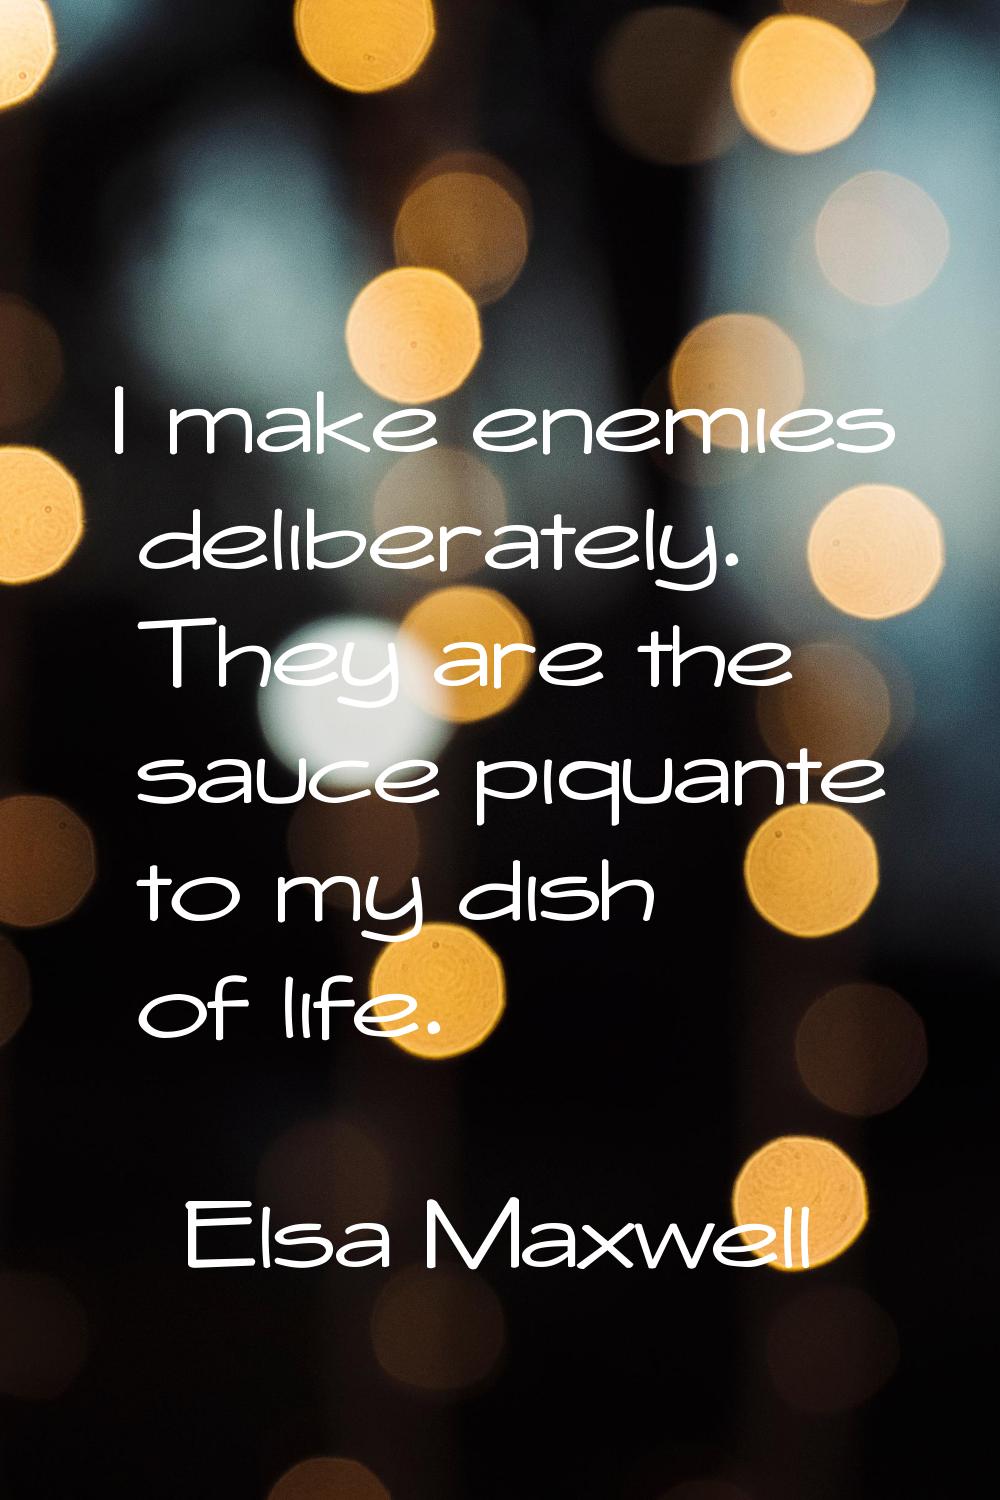 I make enemies deliberately. They are the sauce piquante to my dish of life.